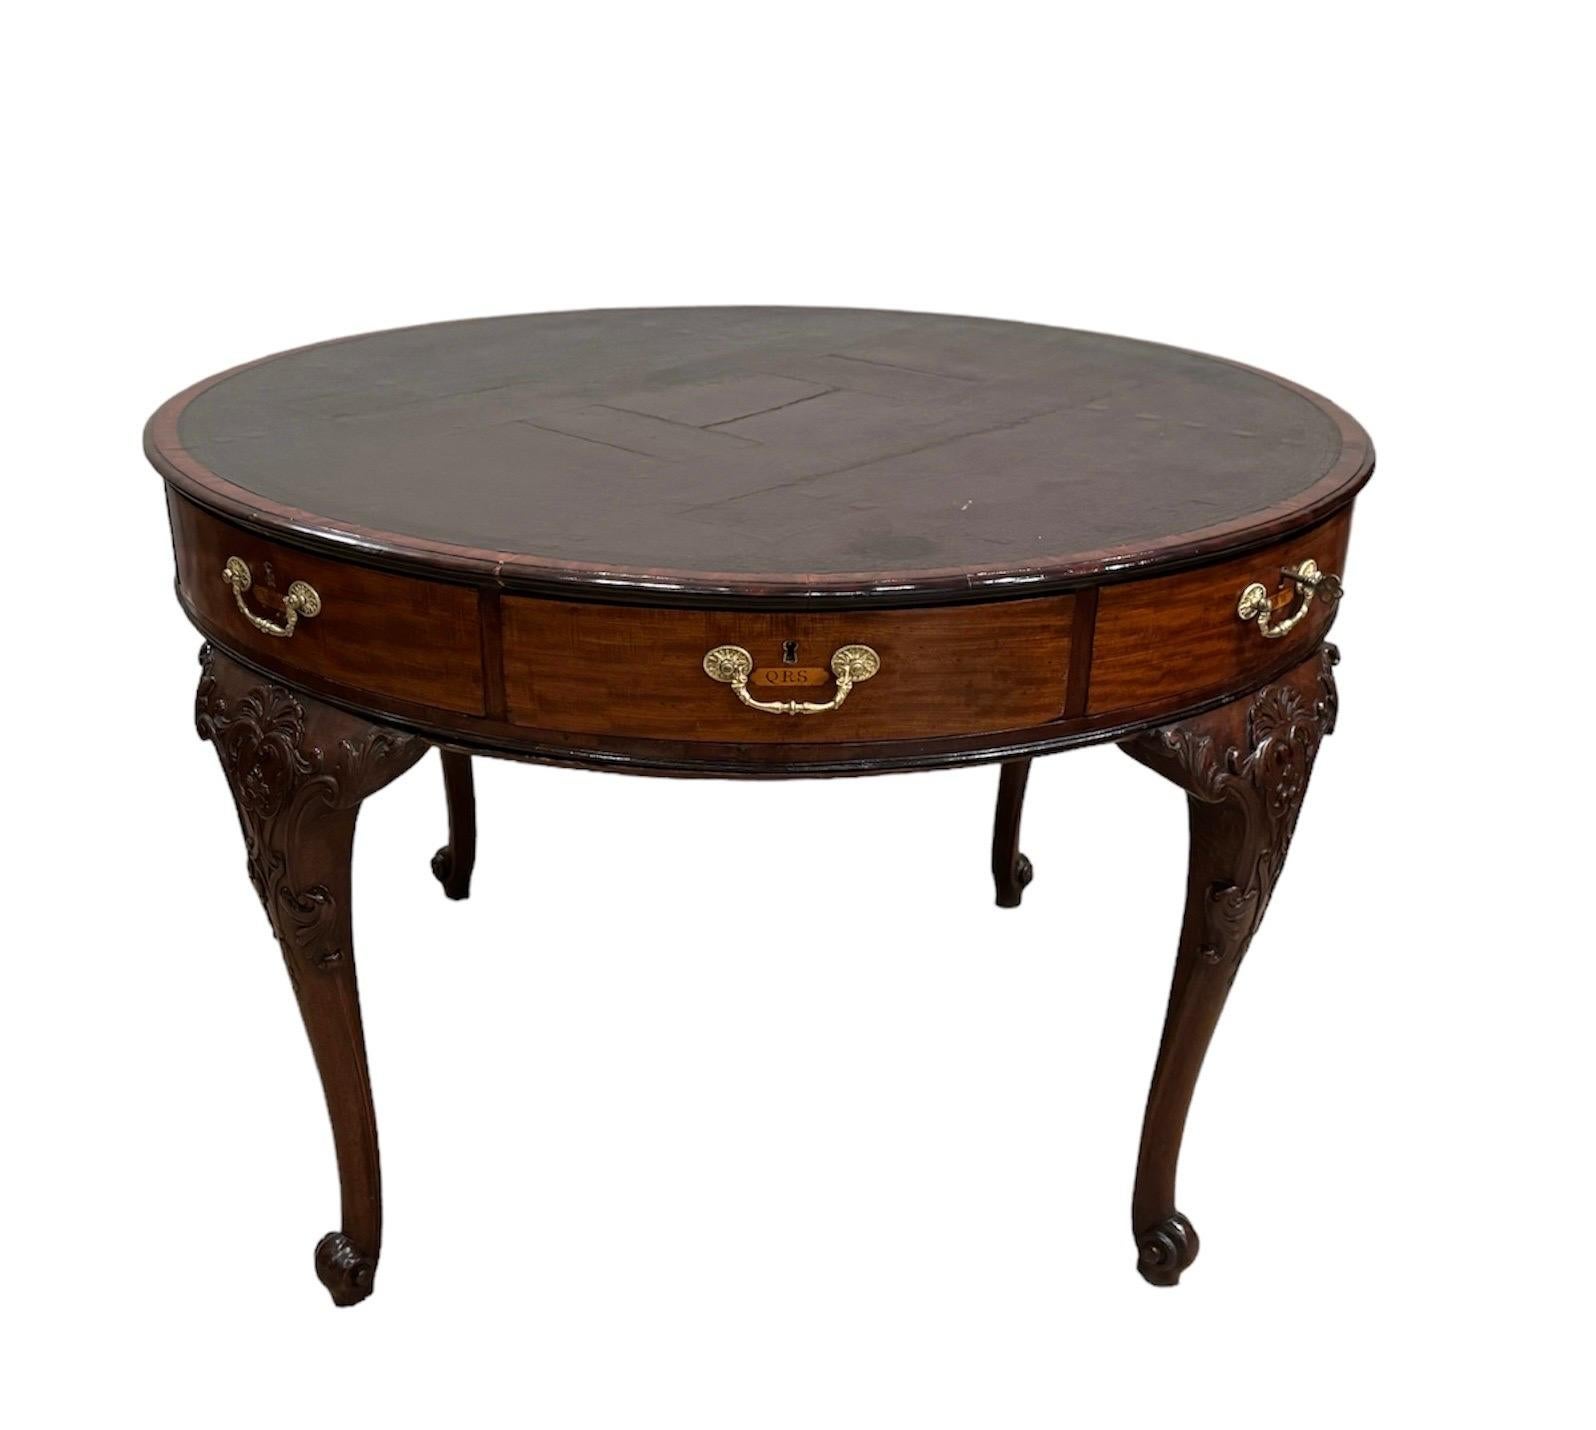 George II Mahogany Rent table with lettered inlaid drawer front & swiveling leather top ( see video) raised on carved cabriole legs terminating in carved scroll feet. with key
leather top has old cracks & imperfections that have been filled. In